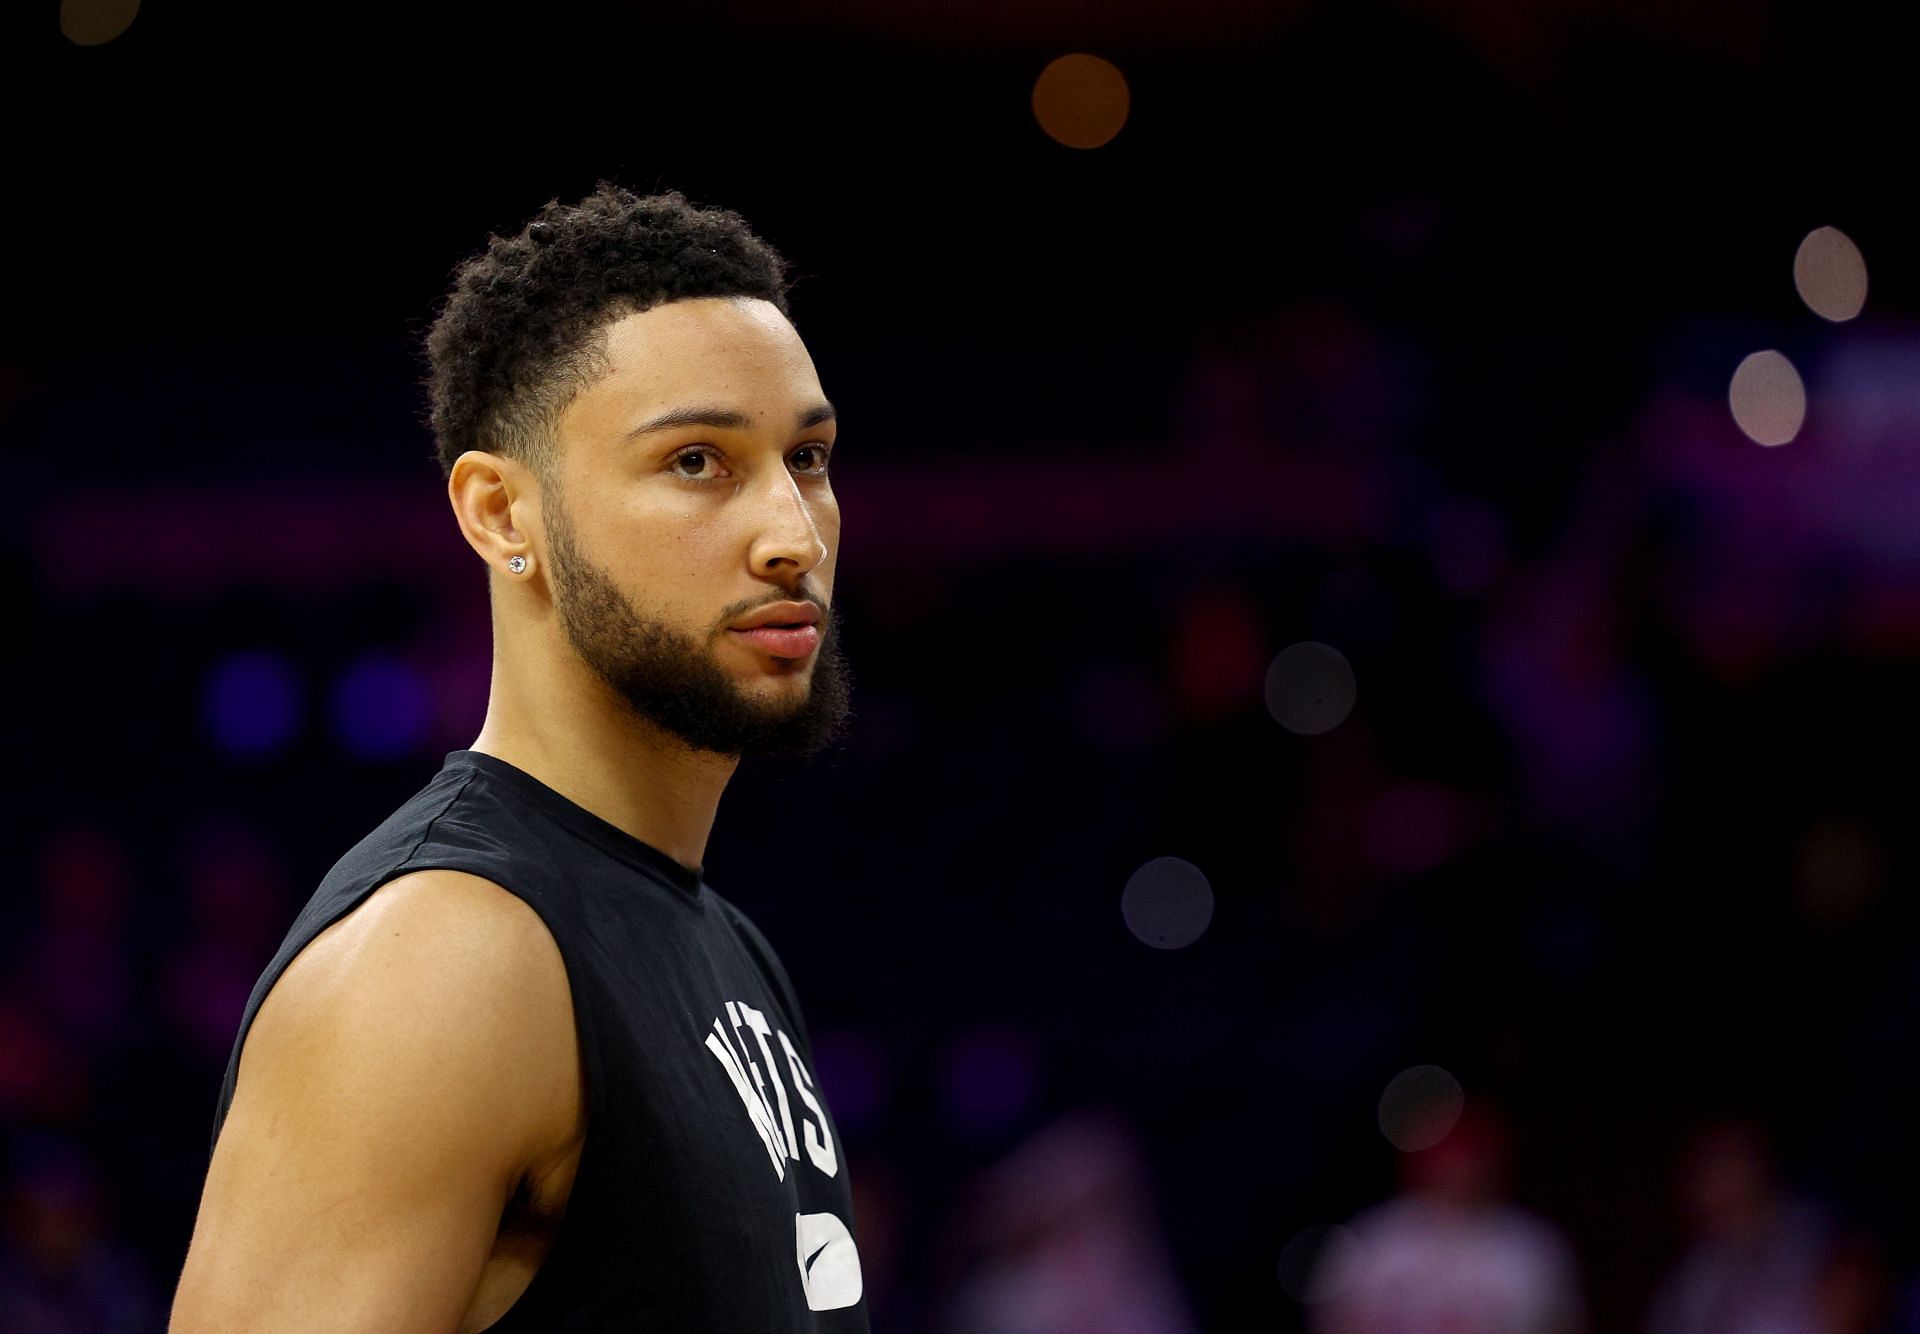 Ben Simmons of the Brooklyn Nets during warmups.